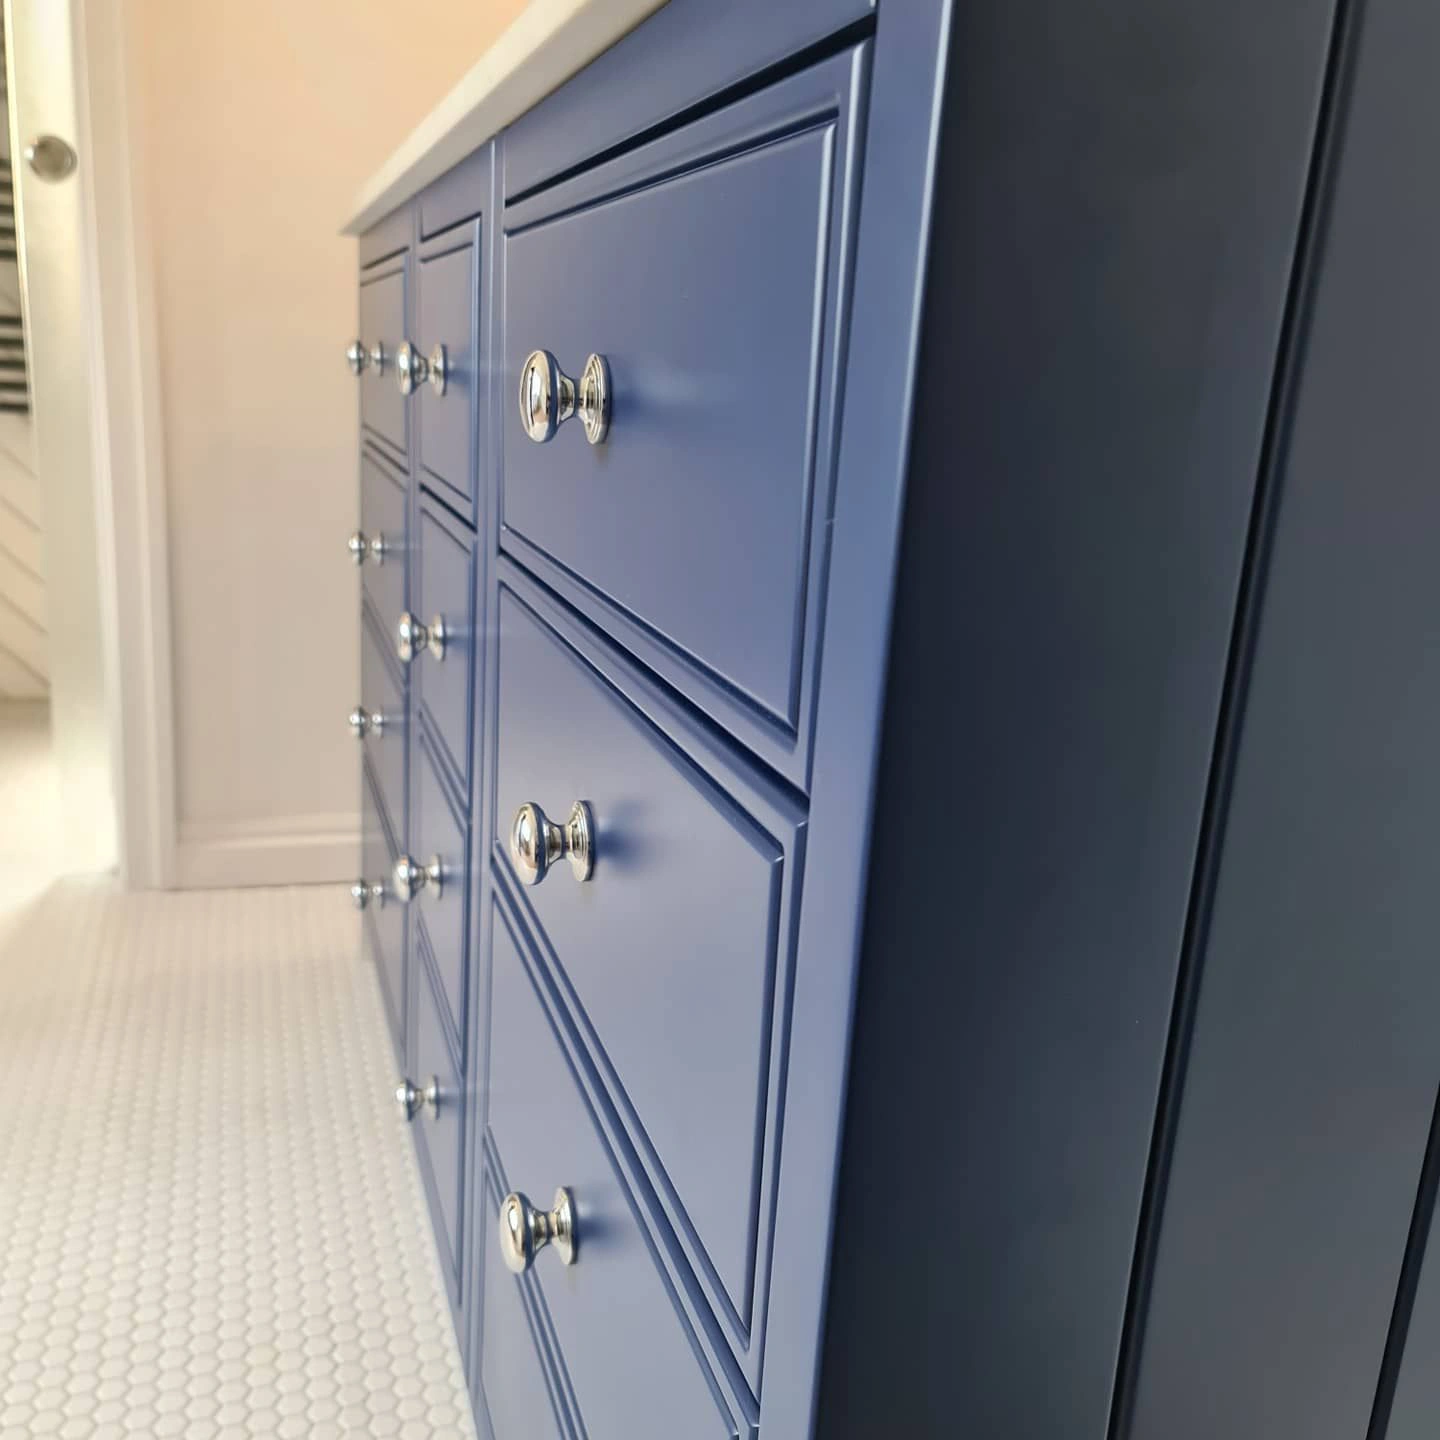 Sapphire blue RAL 5003 painted furniture